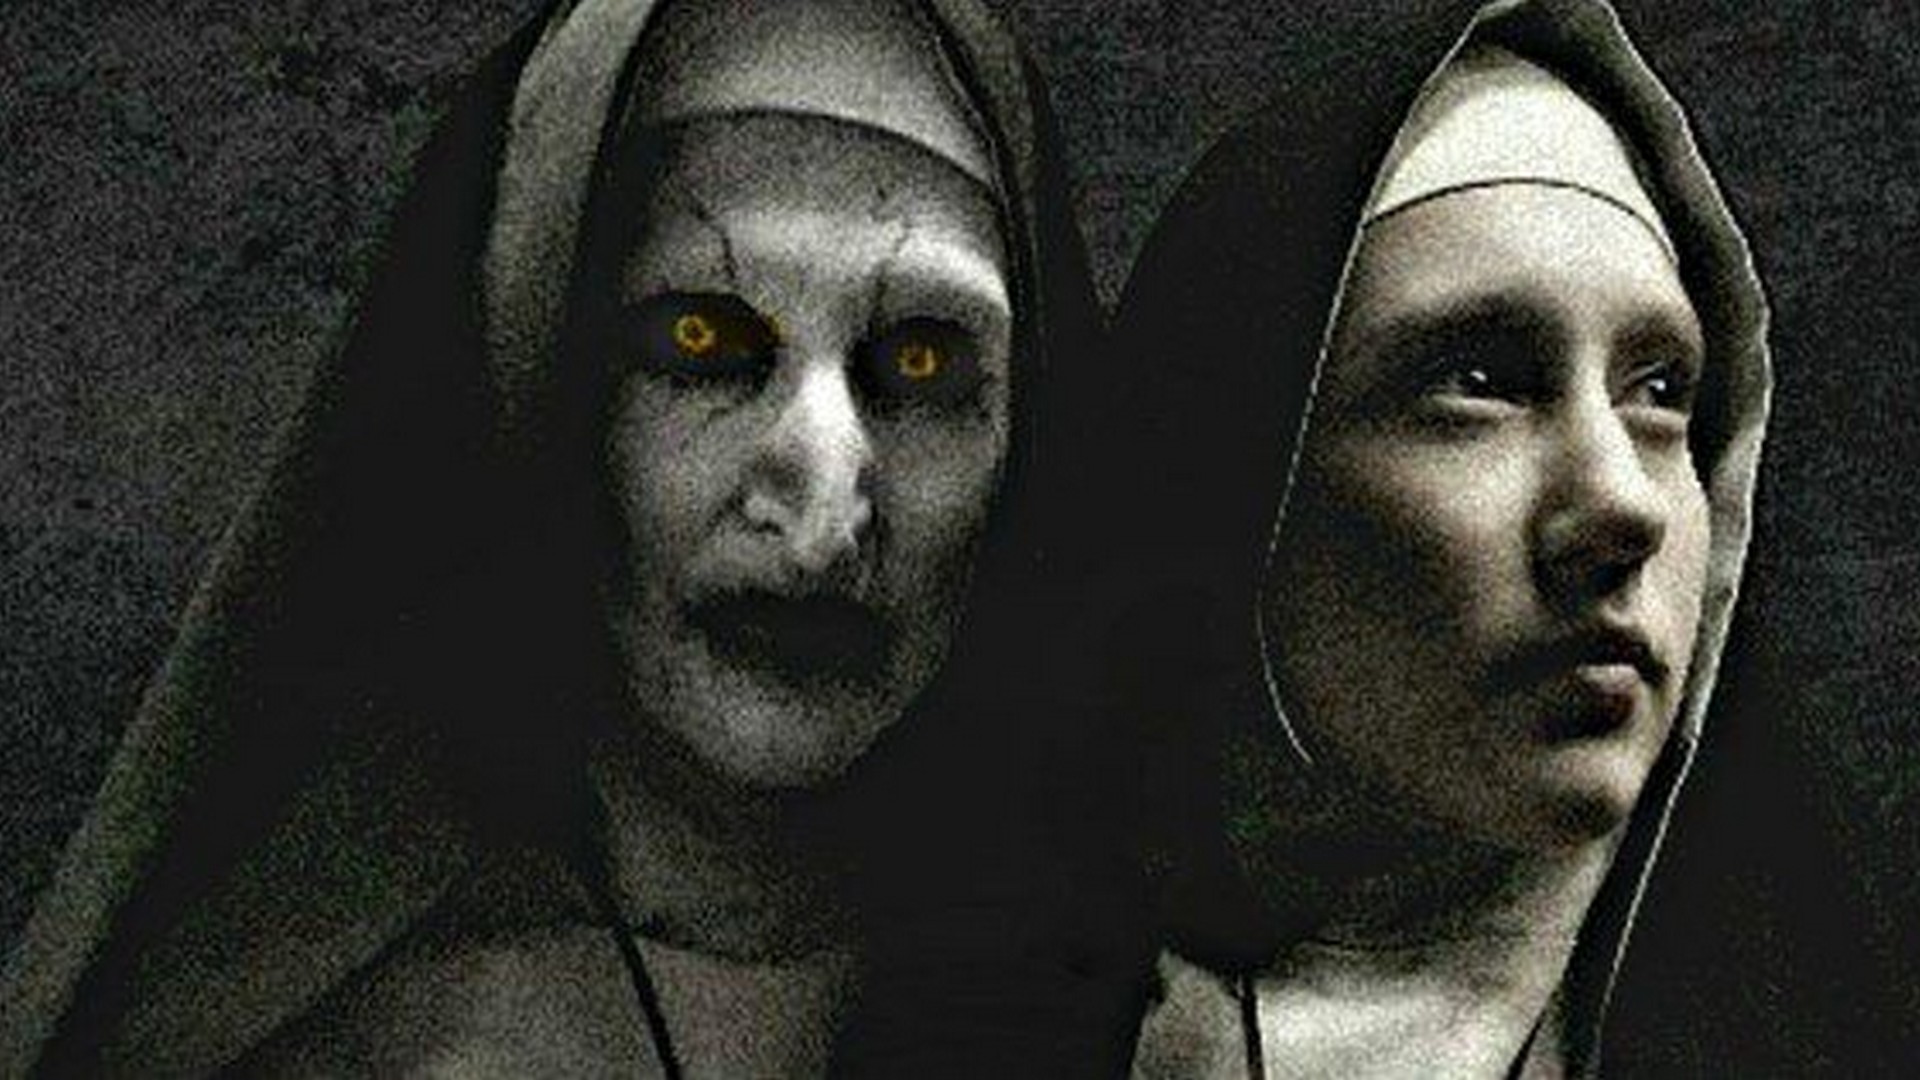 Wallpaper The Nun Valak Desktop with image resolution 1920x1080 pixel. You can use this wallpaper as background for your desktop Computer Screensavers, Android or iPhone smartphones